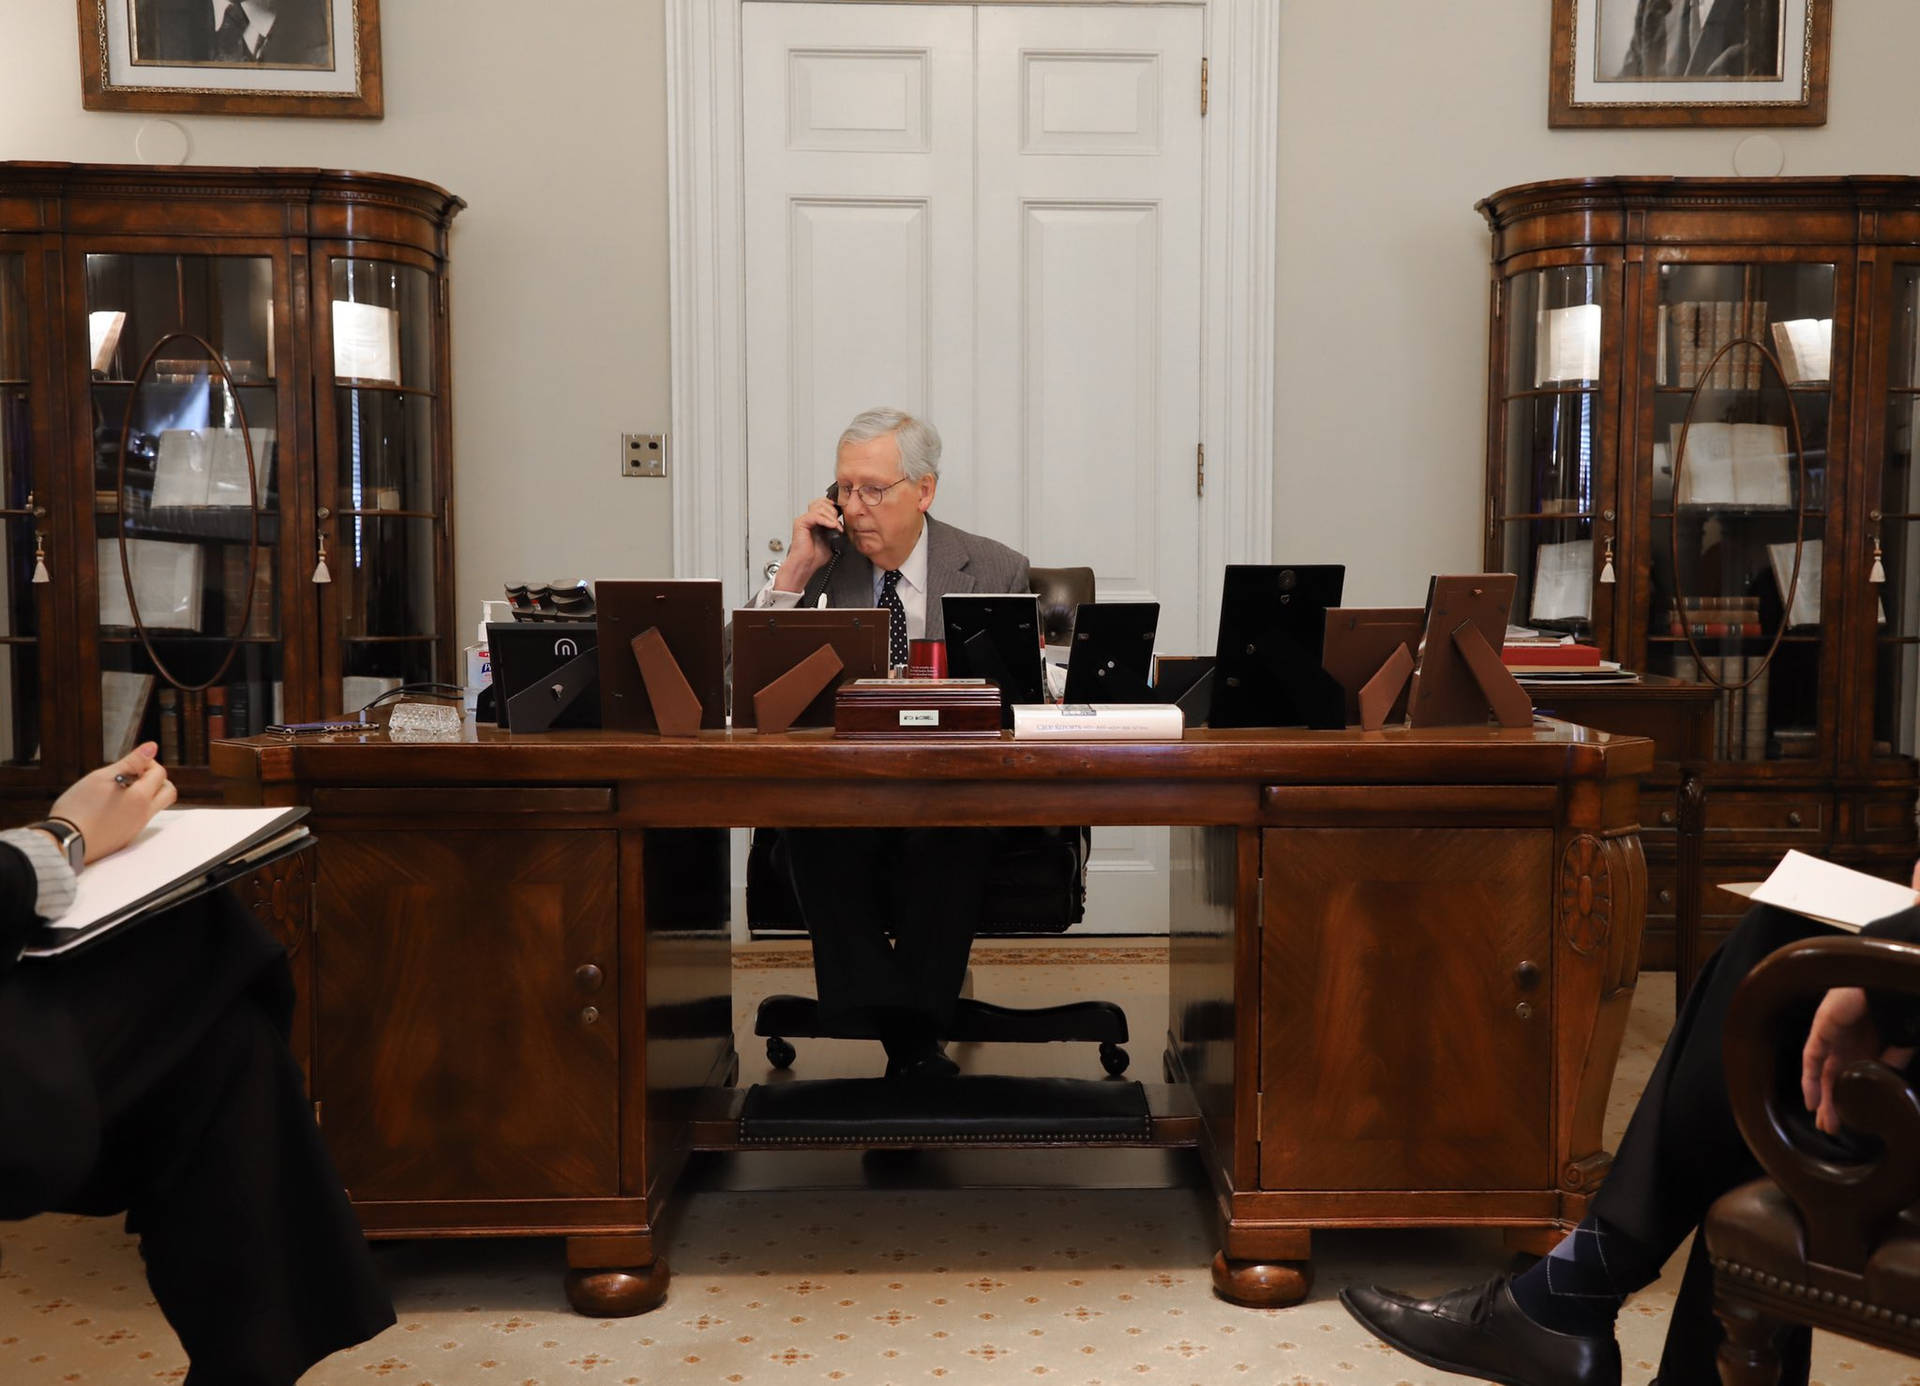 U.S. Senate Majority Leader Mitch McConnell Engaged in Official Duties Wallpaper